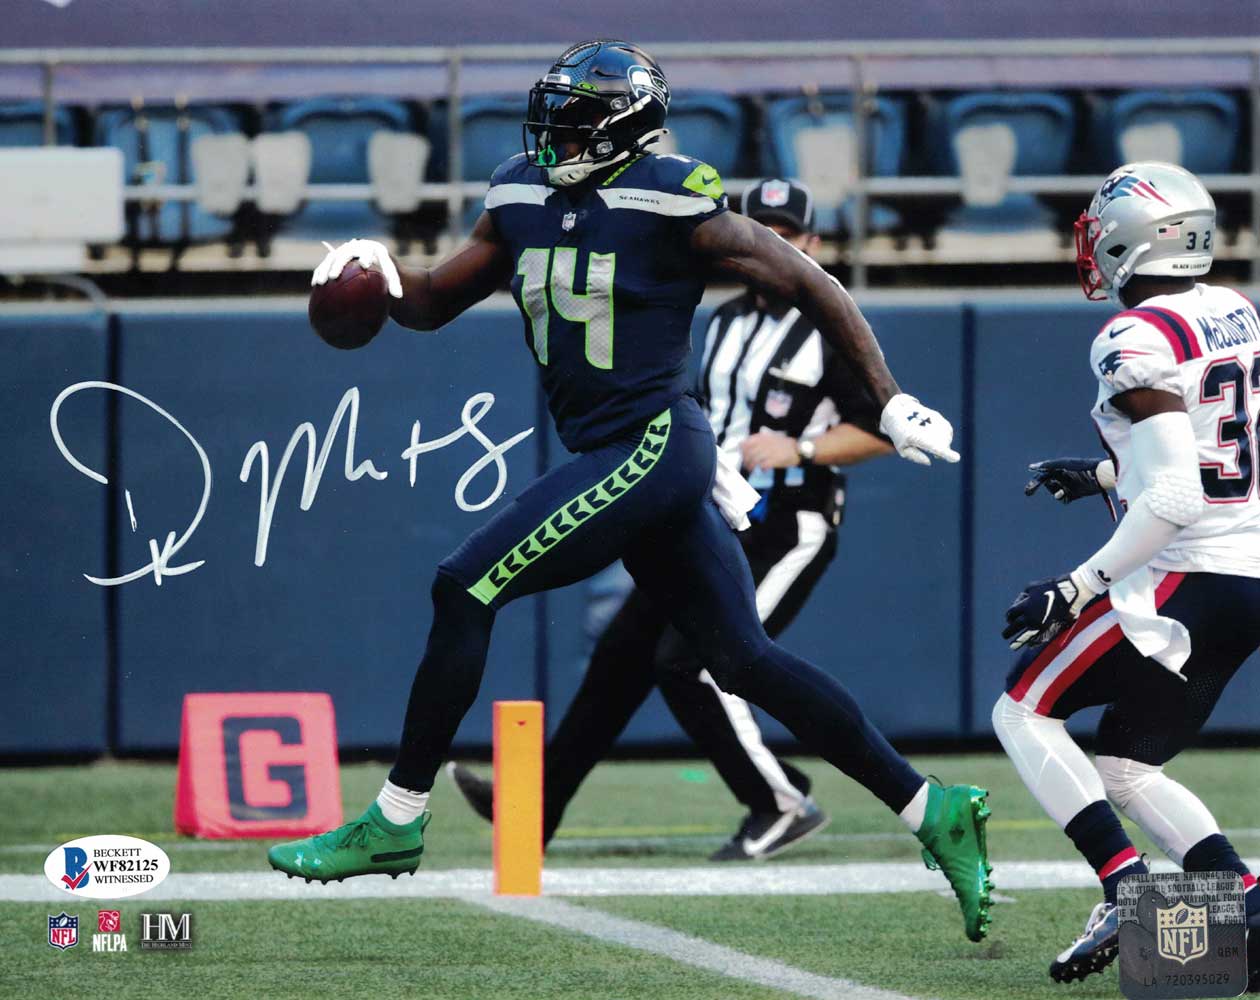 DK Metcalf Autographed/Signed Seattle Seahawks 8x10 Photo BAS 29545 HM